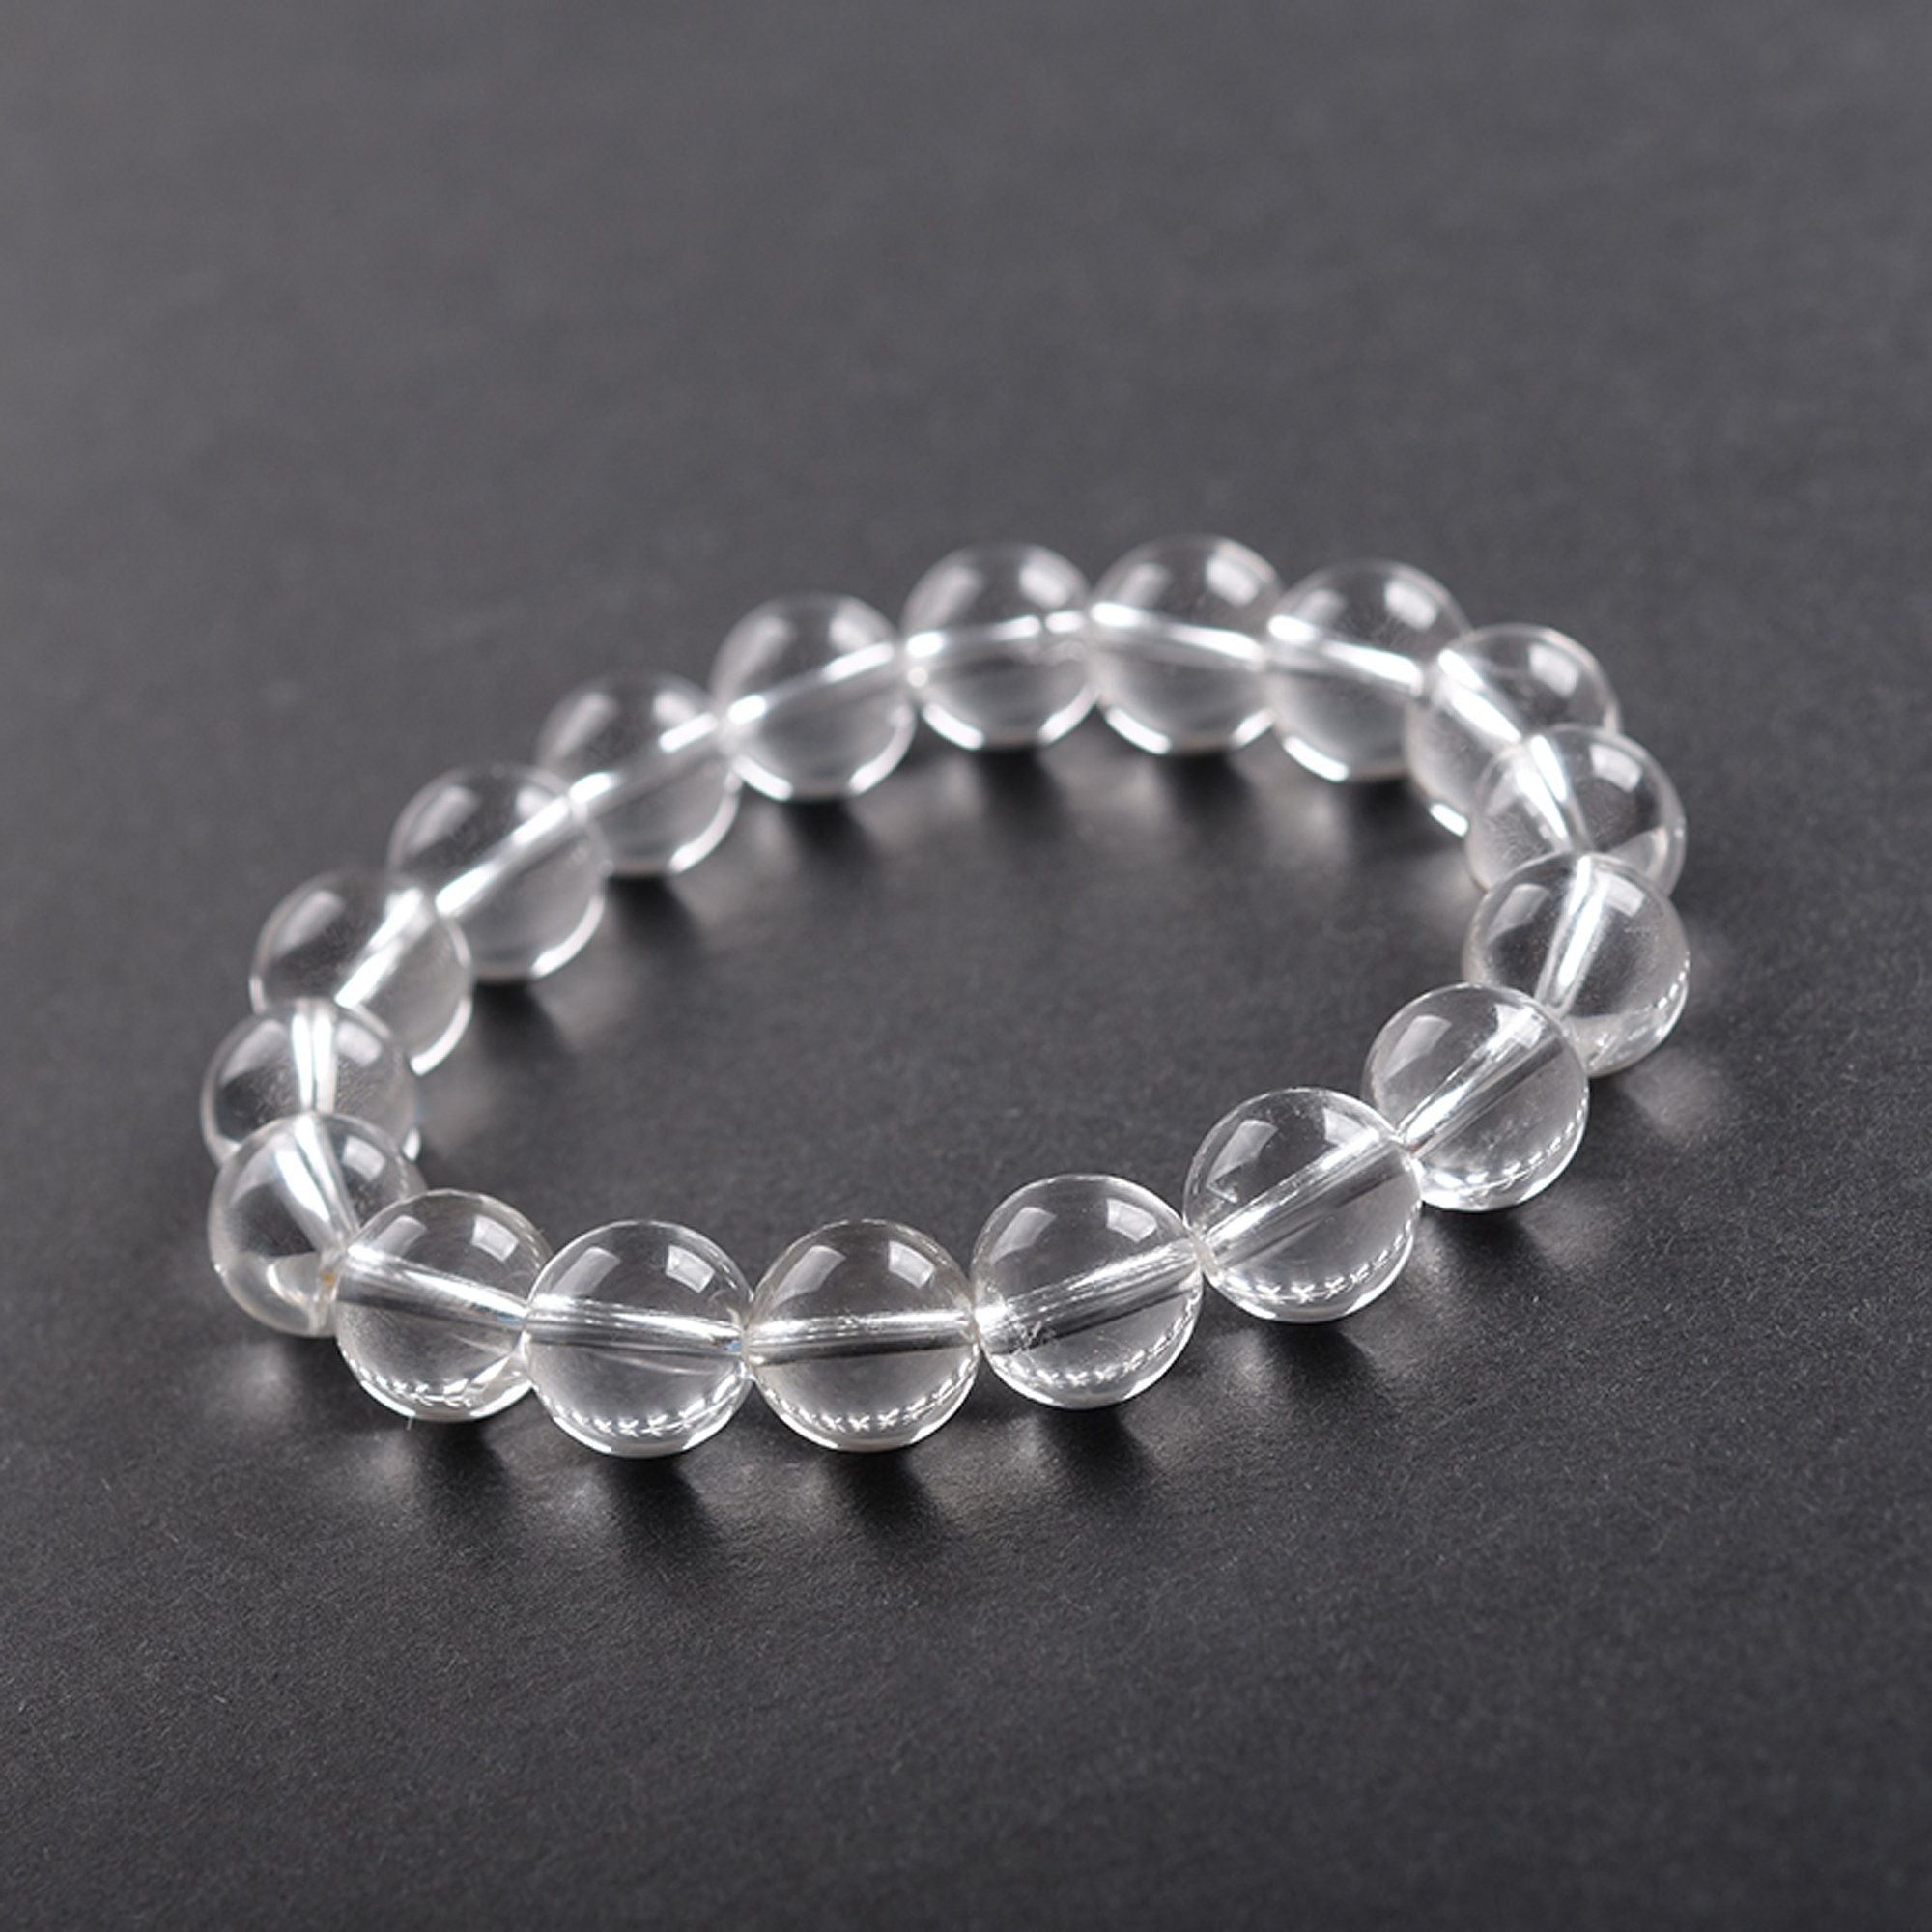 Buy Reiki Crystal Products Clear Quartz Bracelet Crystal Stone Tumble  Bracelet for Reiki Healing and Crystal Healing (Color : Clear) at Amazon.in